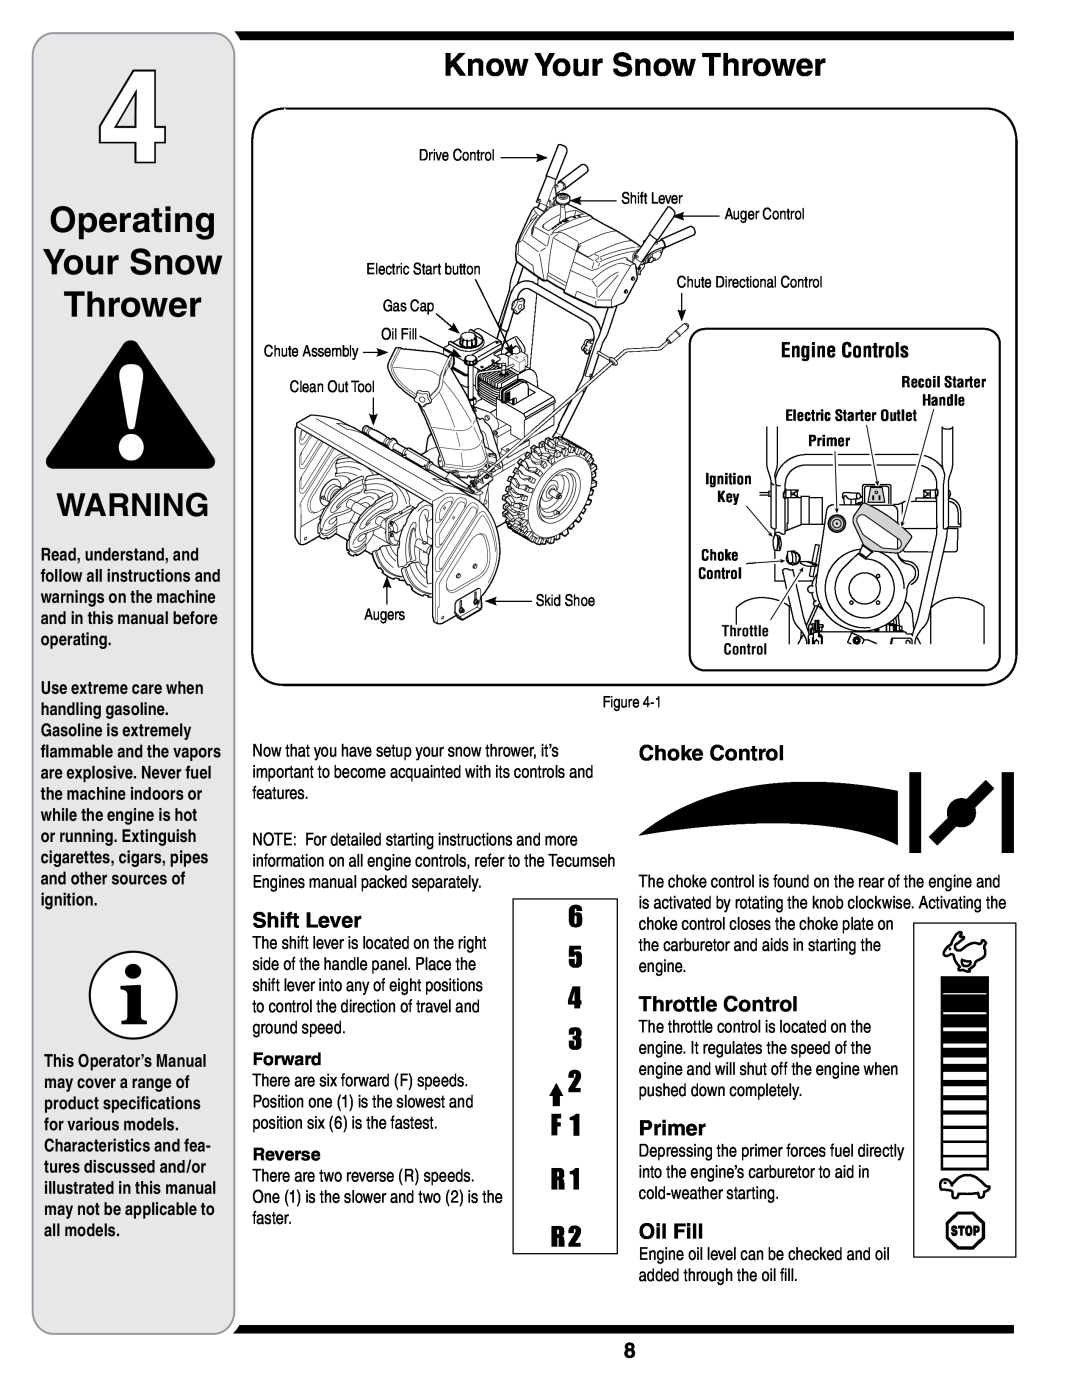 Troy-Bilt STORM Series warranty Operating Your Snow Thrower, Know Your Snow Thrower, Engine Controls, Forward, Reverse 